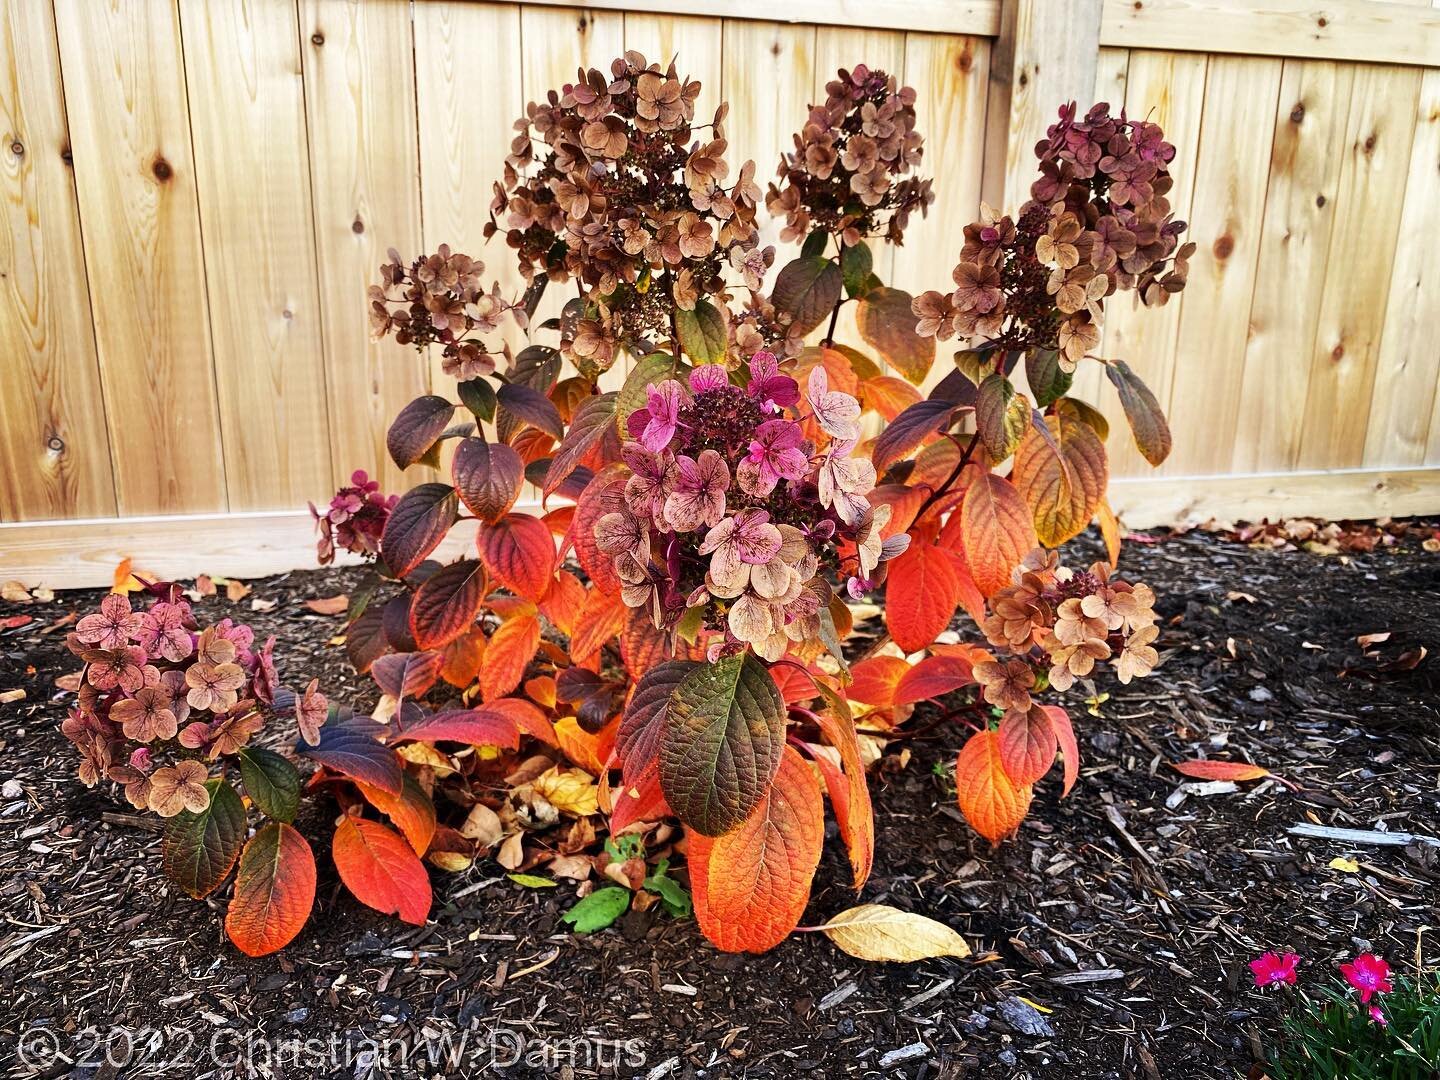 I did not expect my hydrangea to be quite such an autumn beauty!

#naturegram #flowers #autumn #color #colour #surprise